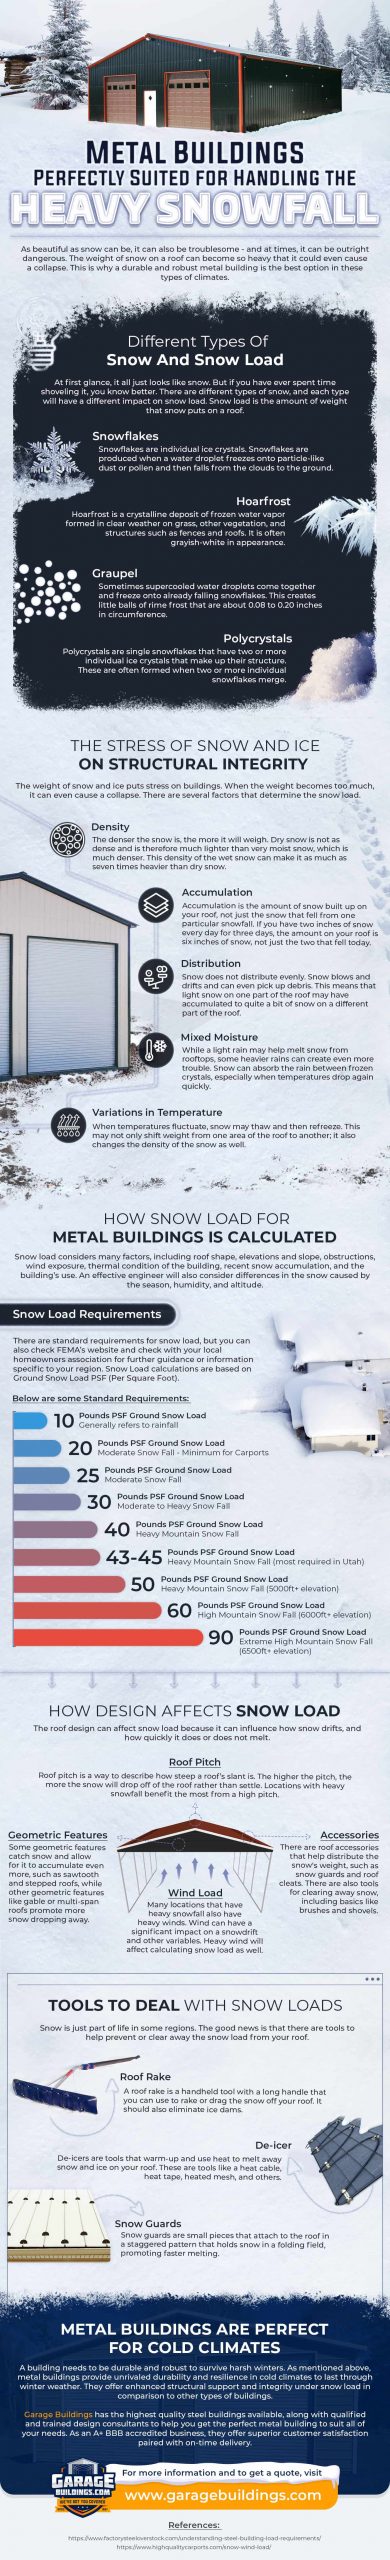 Metal Buildings – for Handling the Heavy Snowfall - Industry Today ...